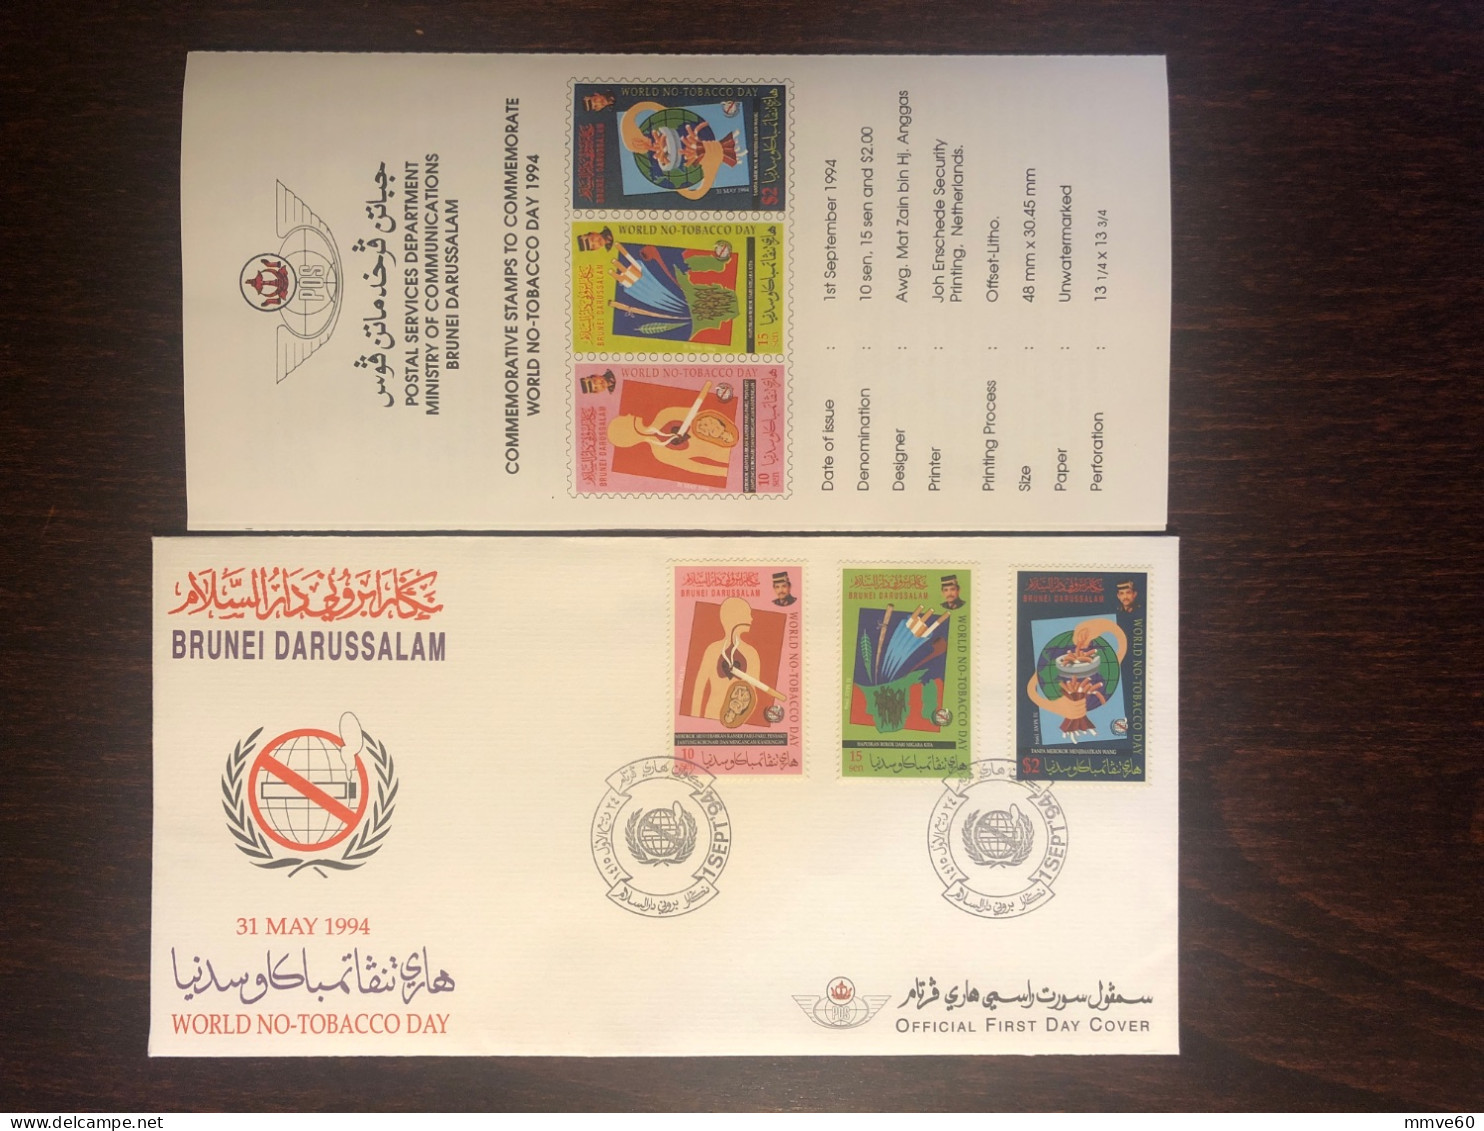 BRUNEI FDC COVER 1994 YEAR SMOKING HEALTH MEDICINE STAMPS - Brunei (1984-...)